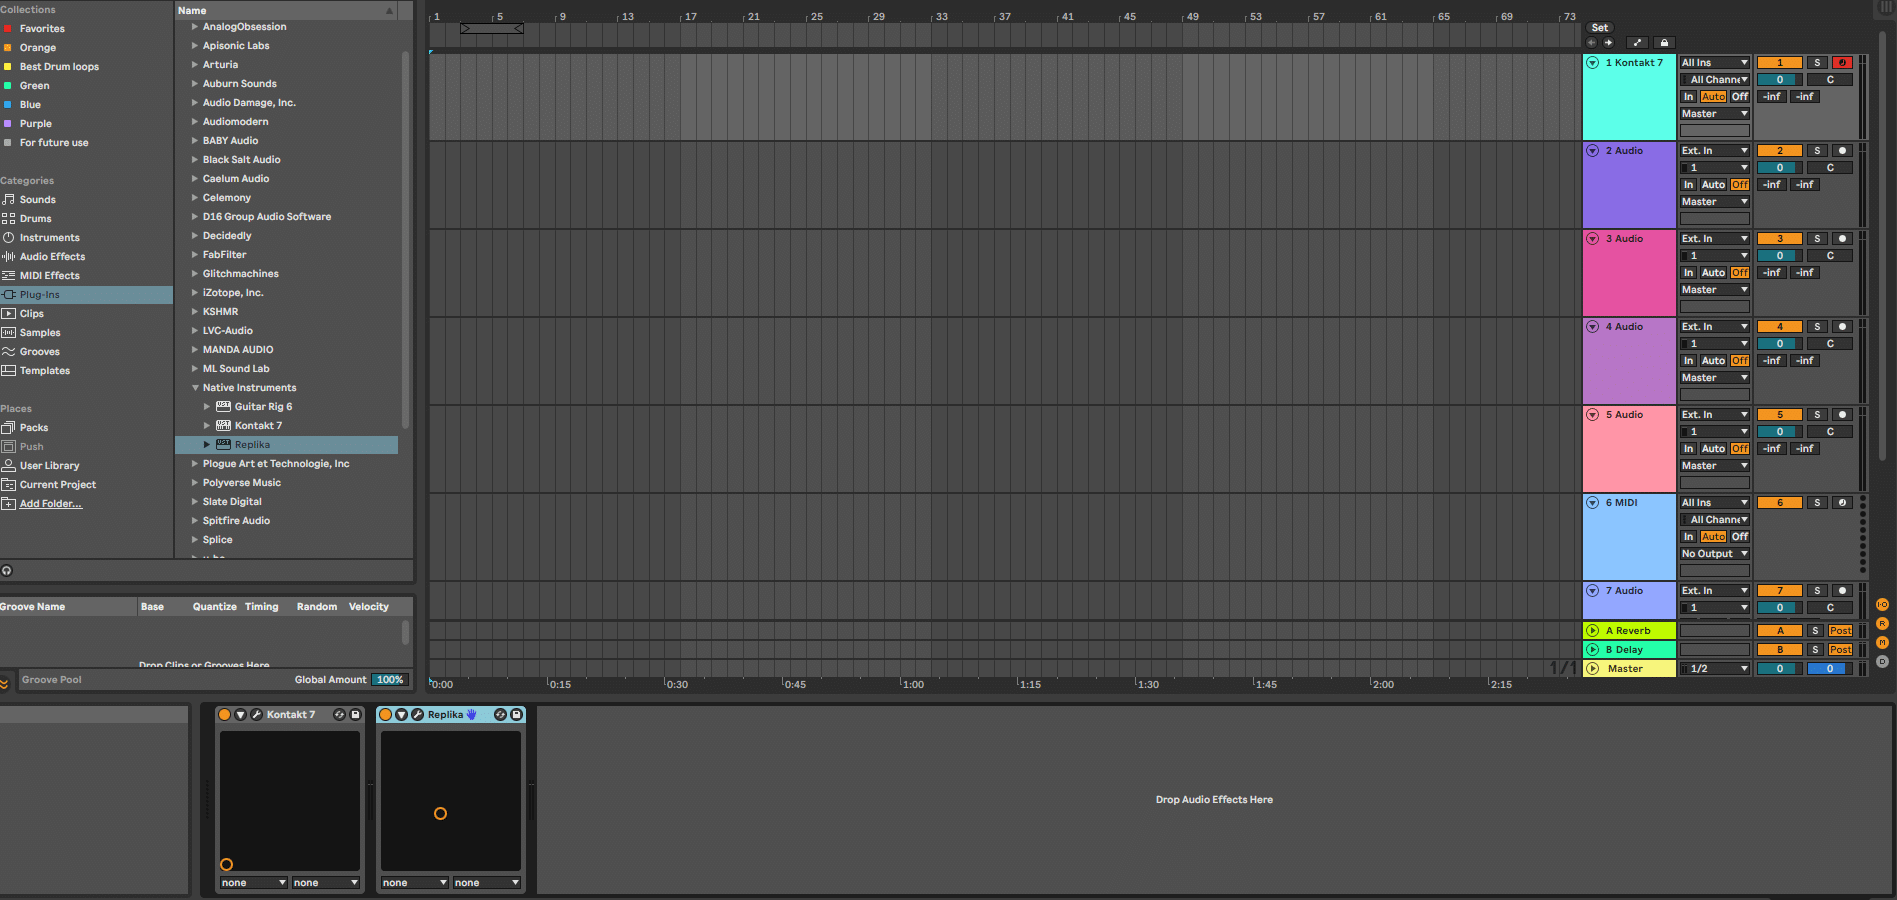 Ableton Live's interface is more straight-forward